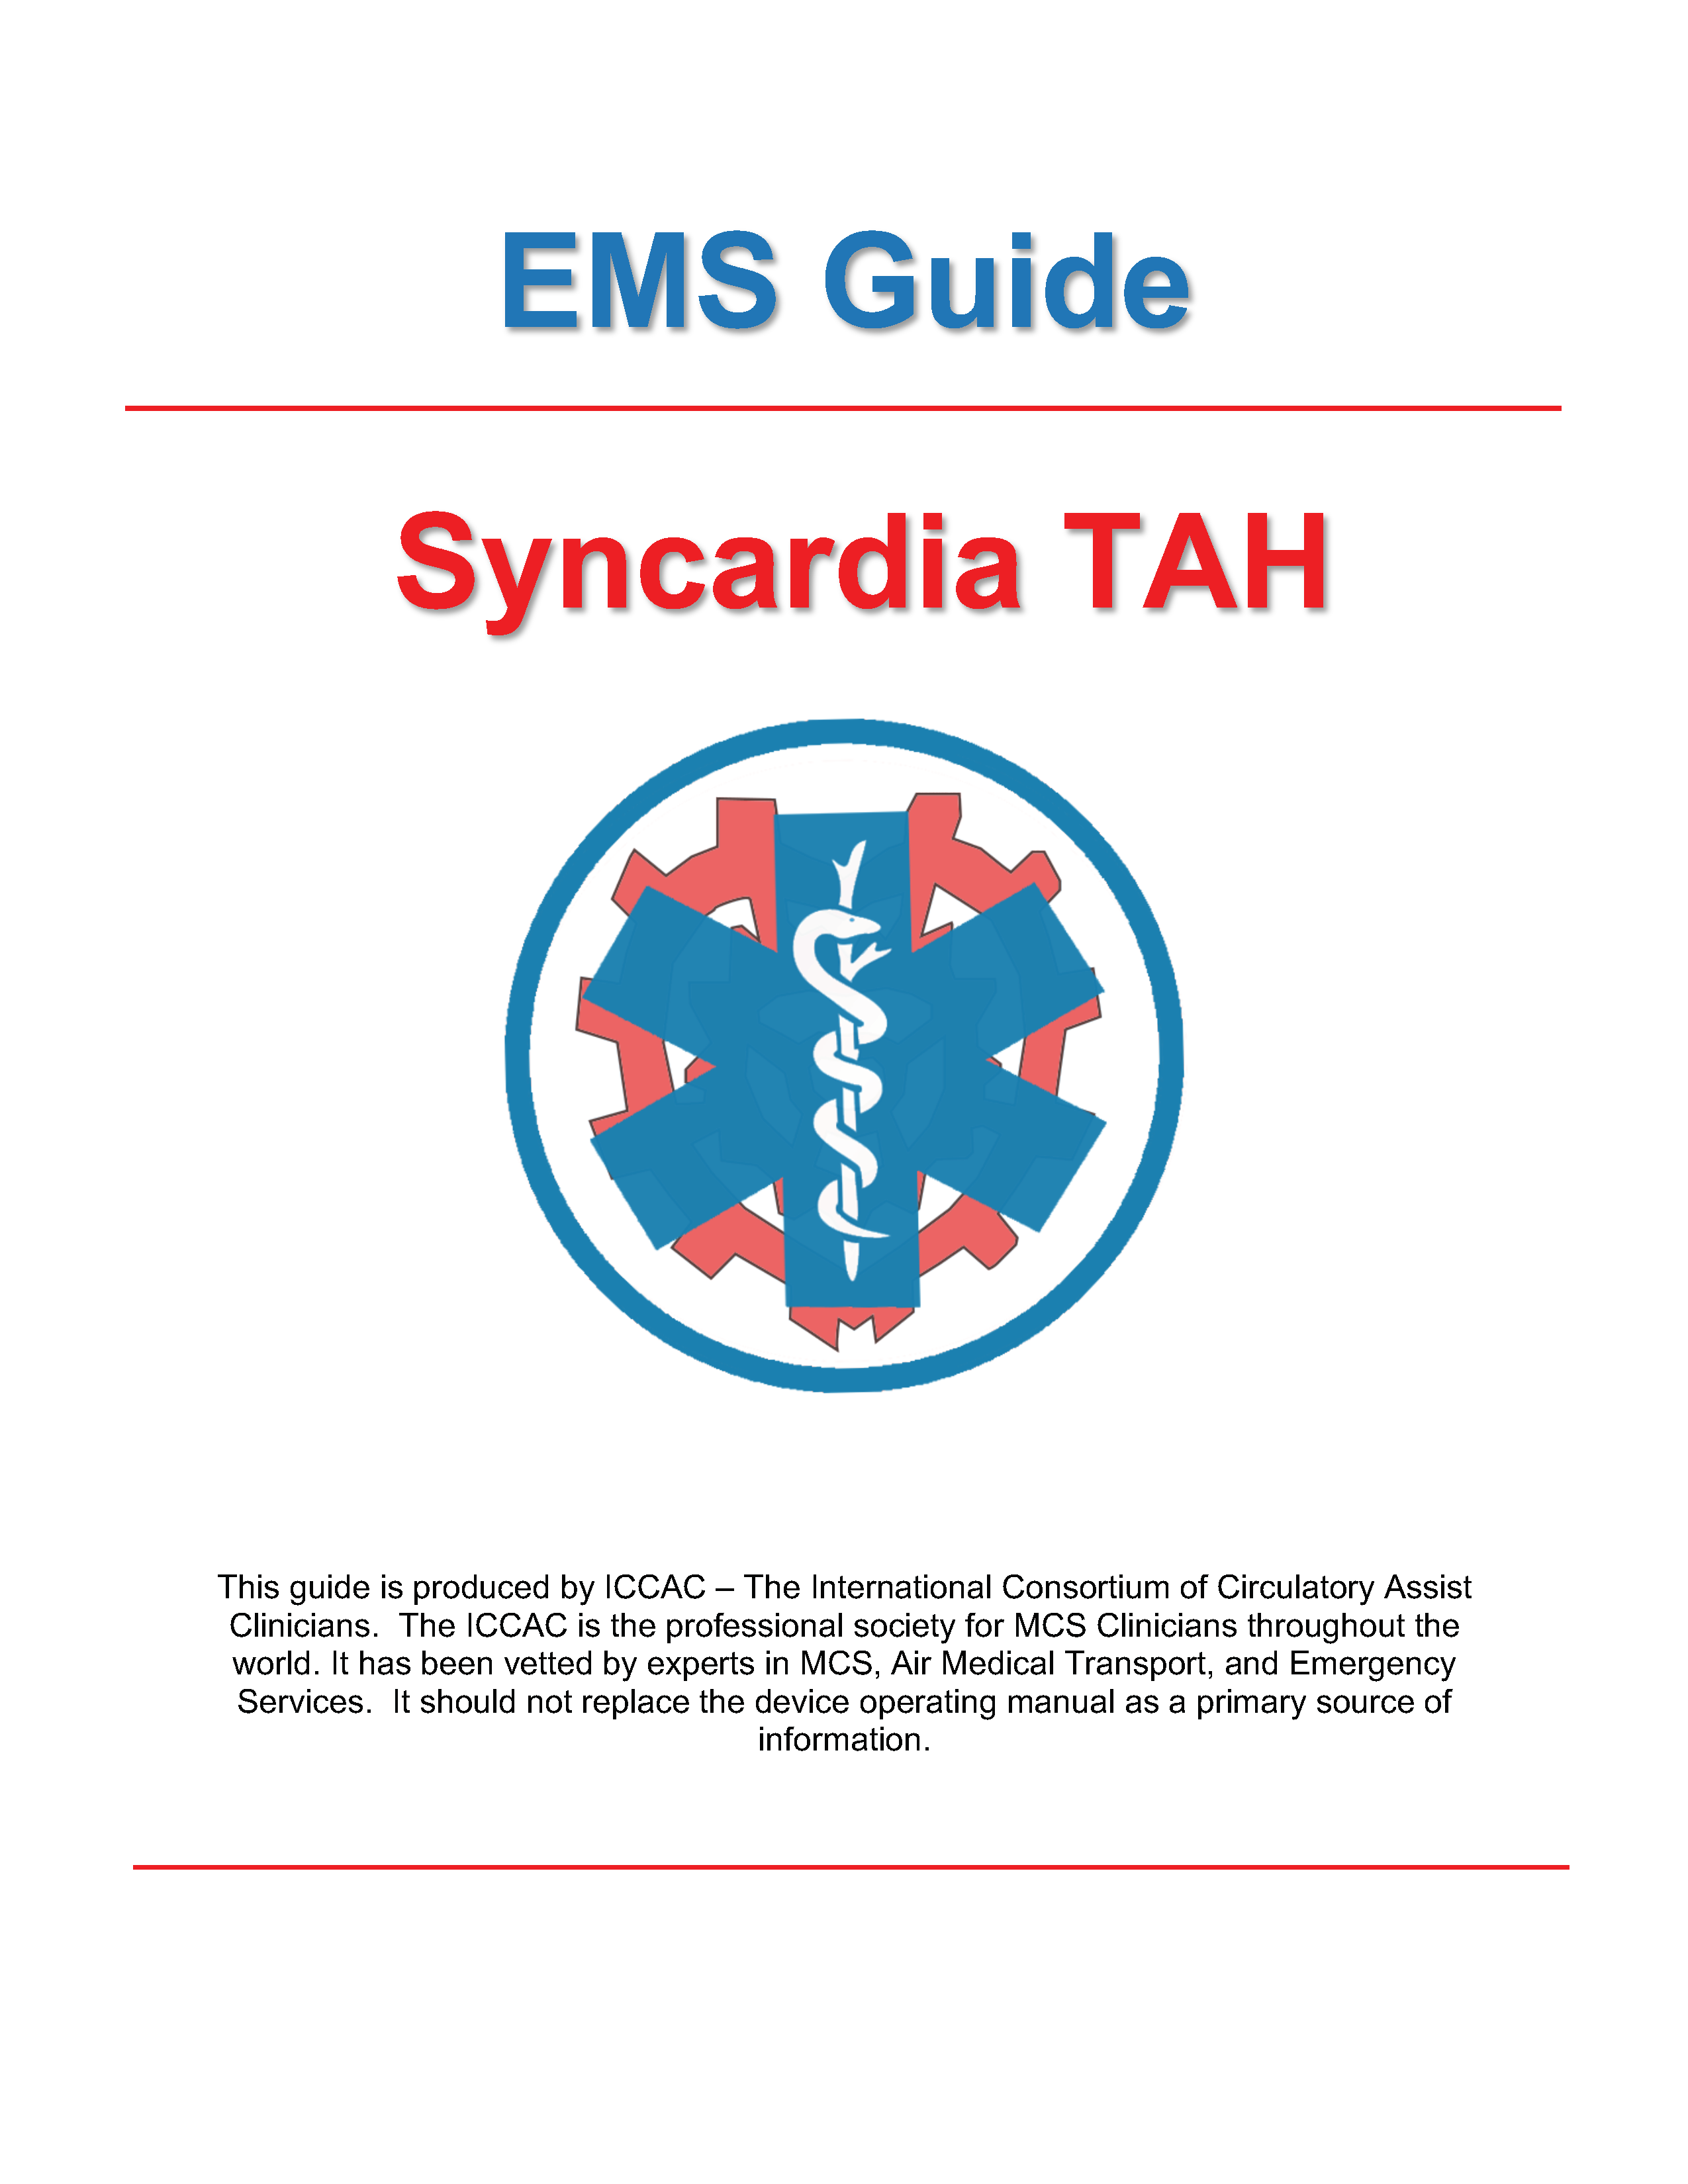 Syncardia EMS cover.png